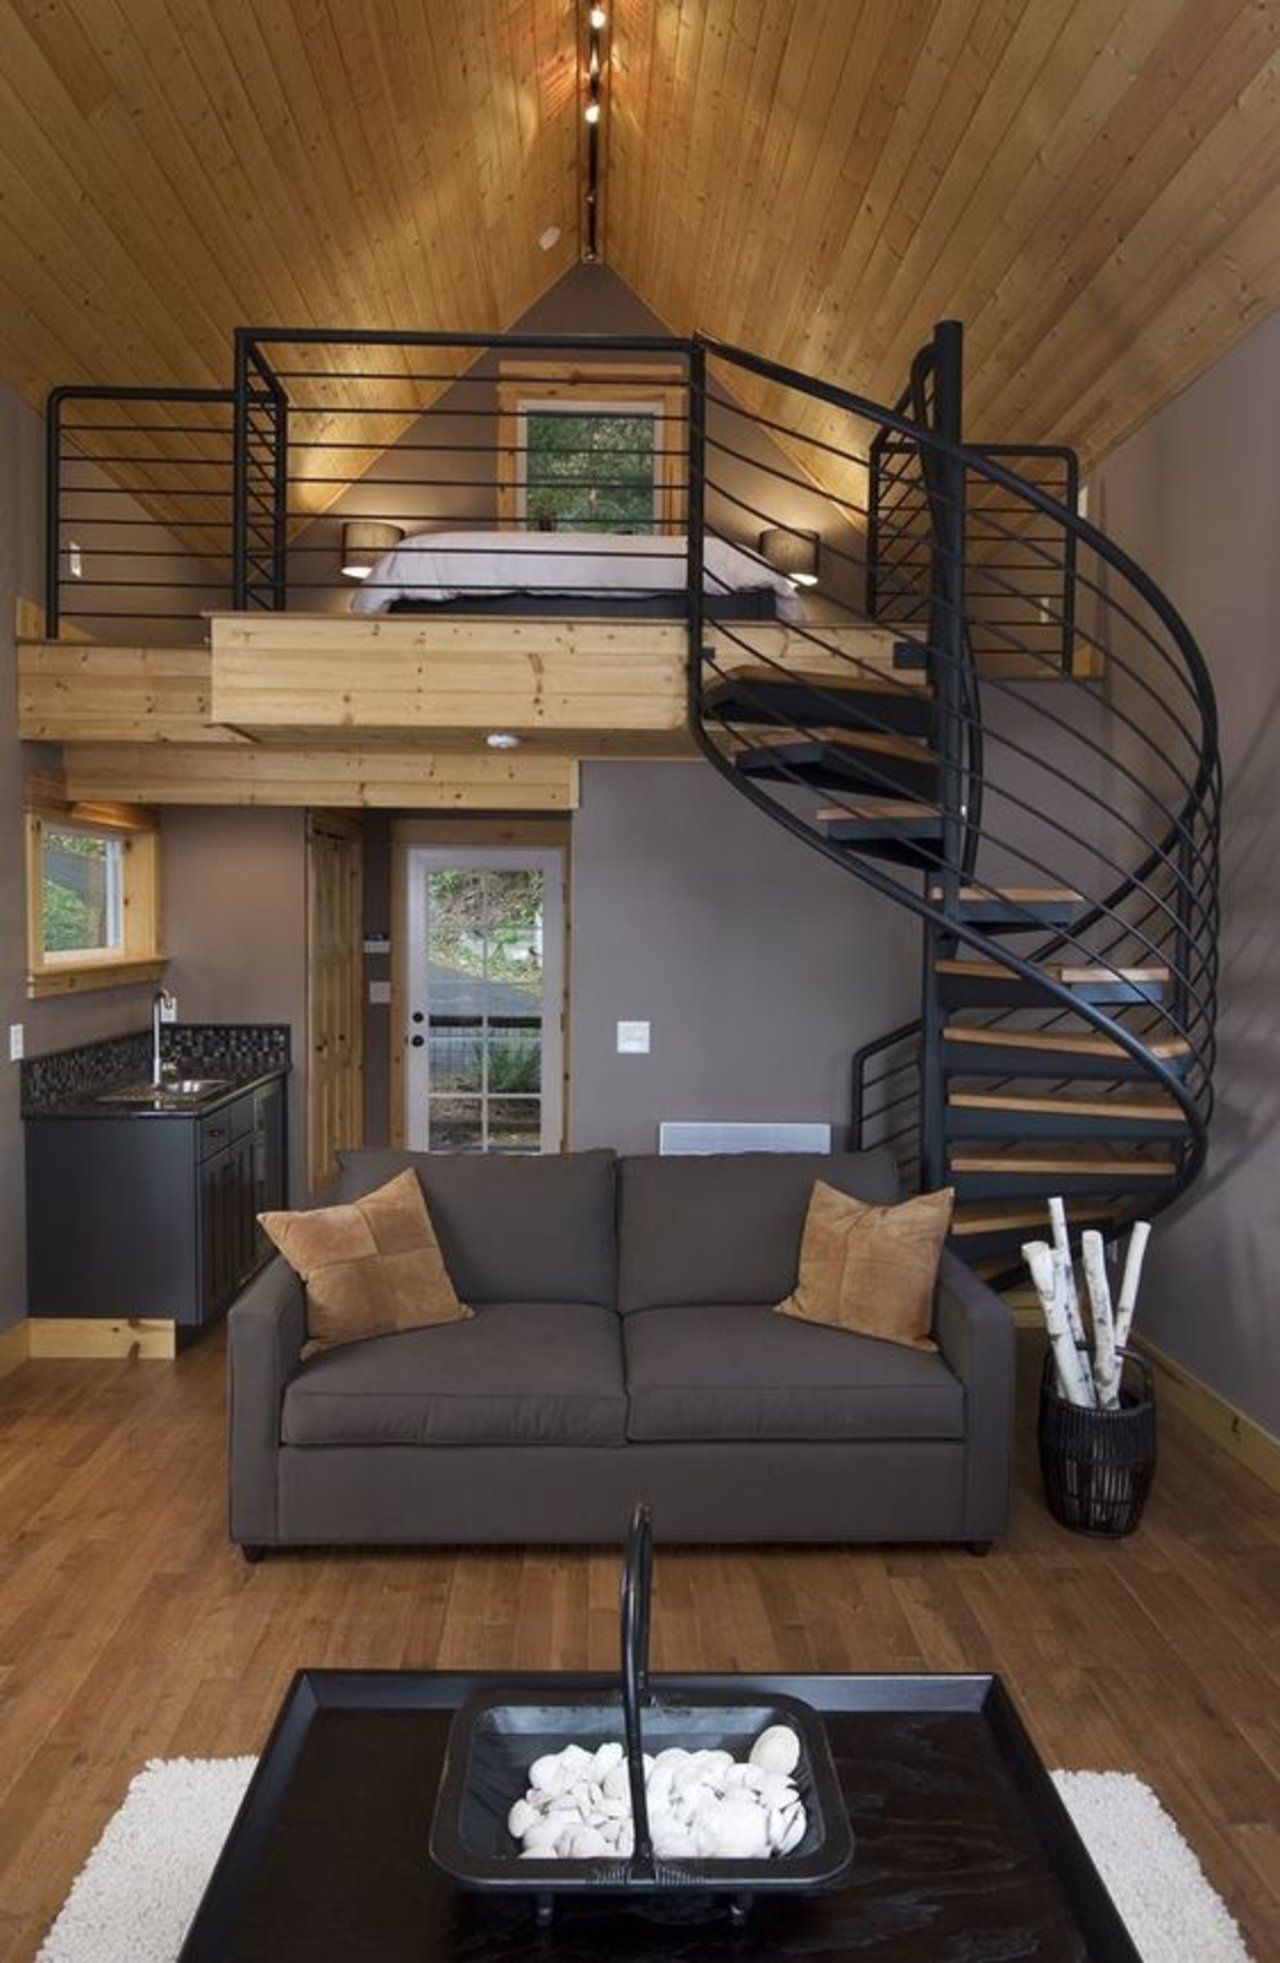 Stylish tiny house with a spiral staircase